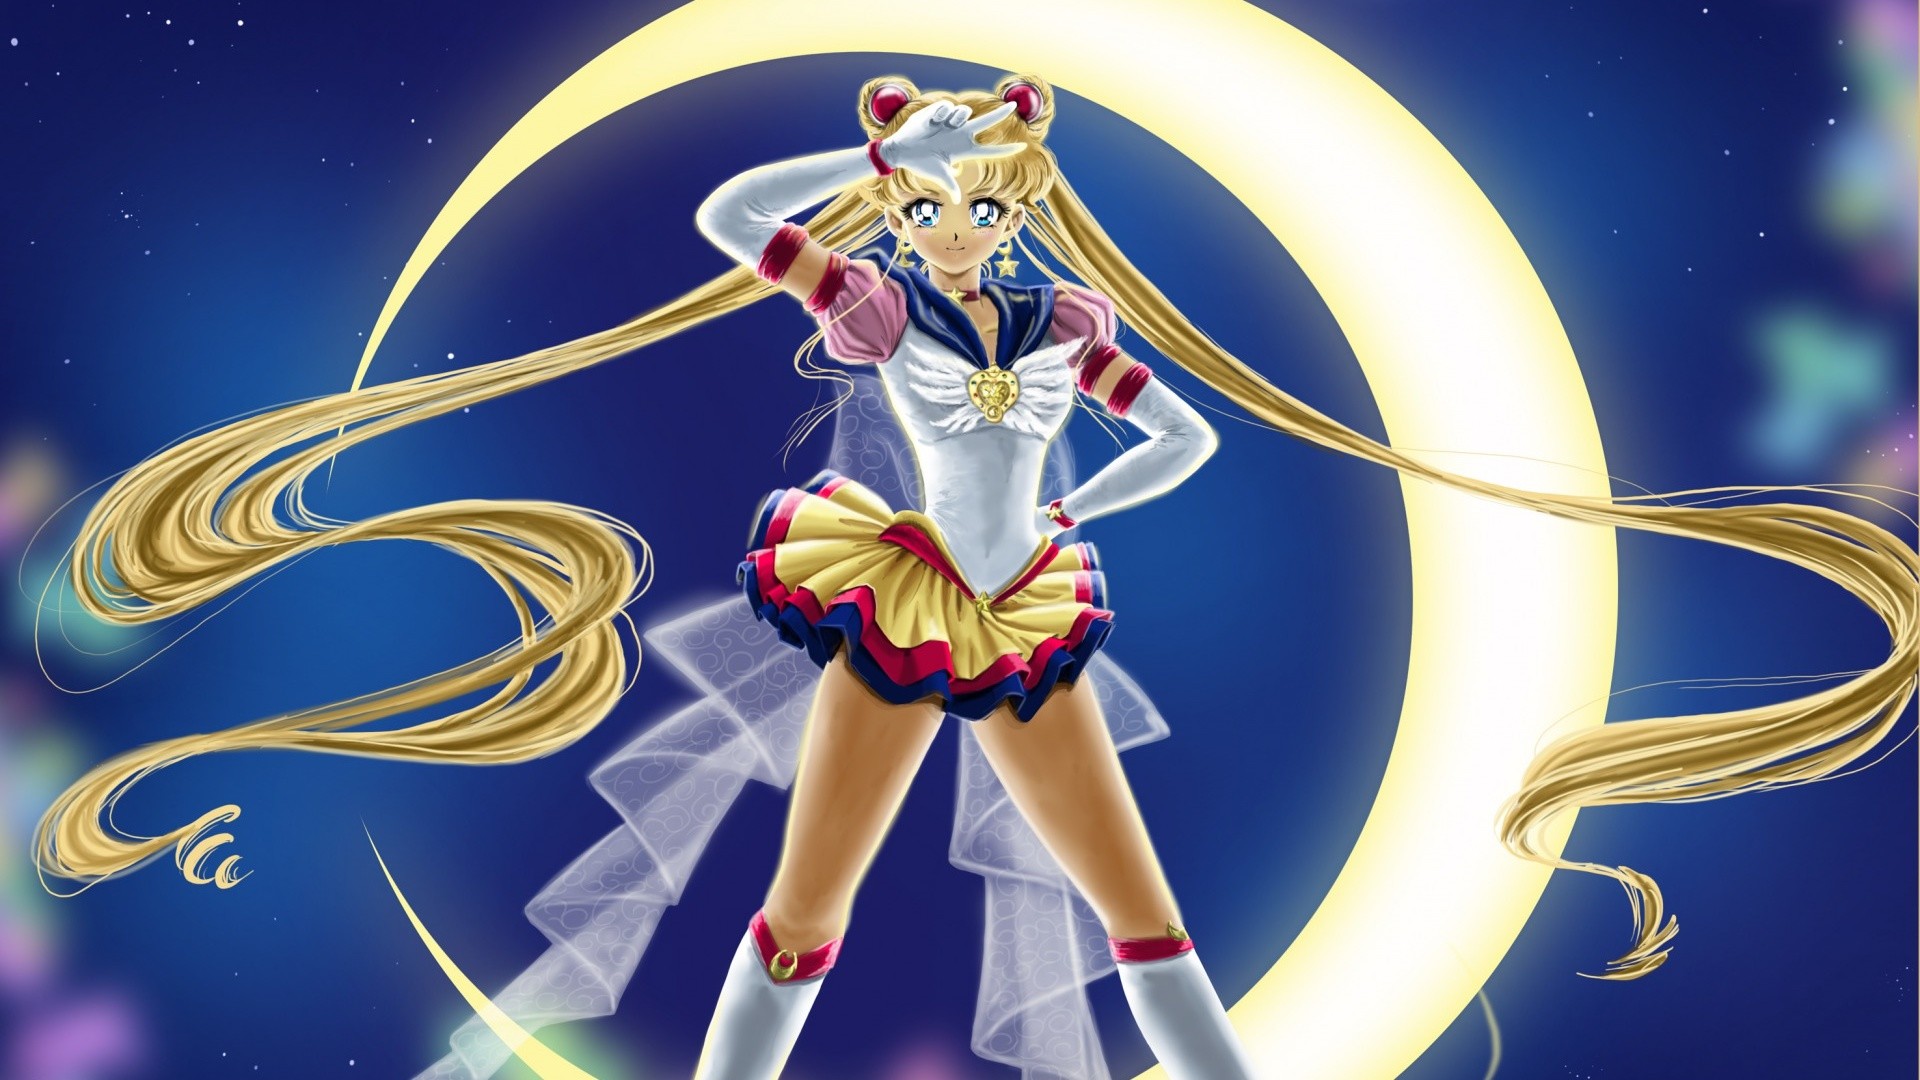 1920x1080 How cool is Eternal Sailor Moon without the big bulky wings?